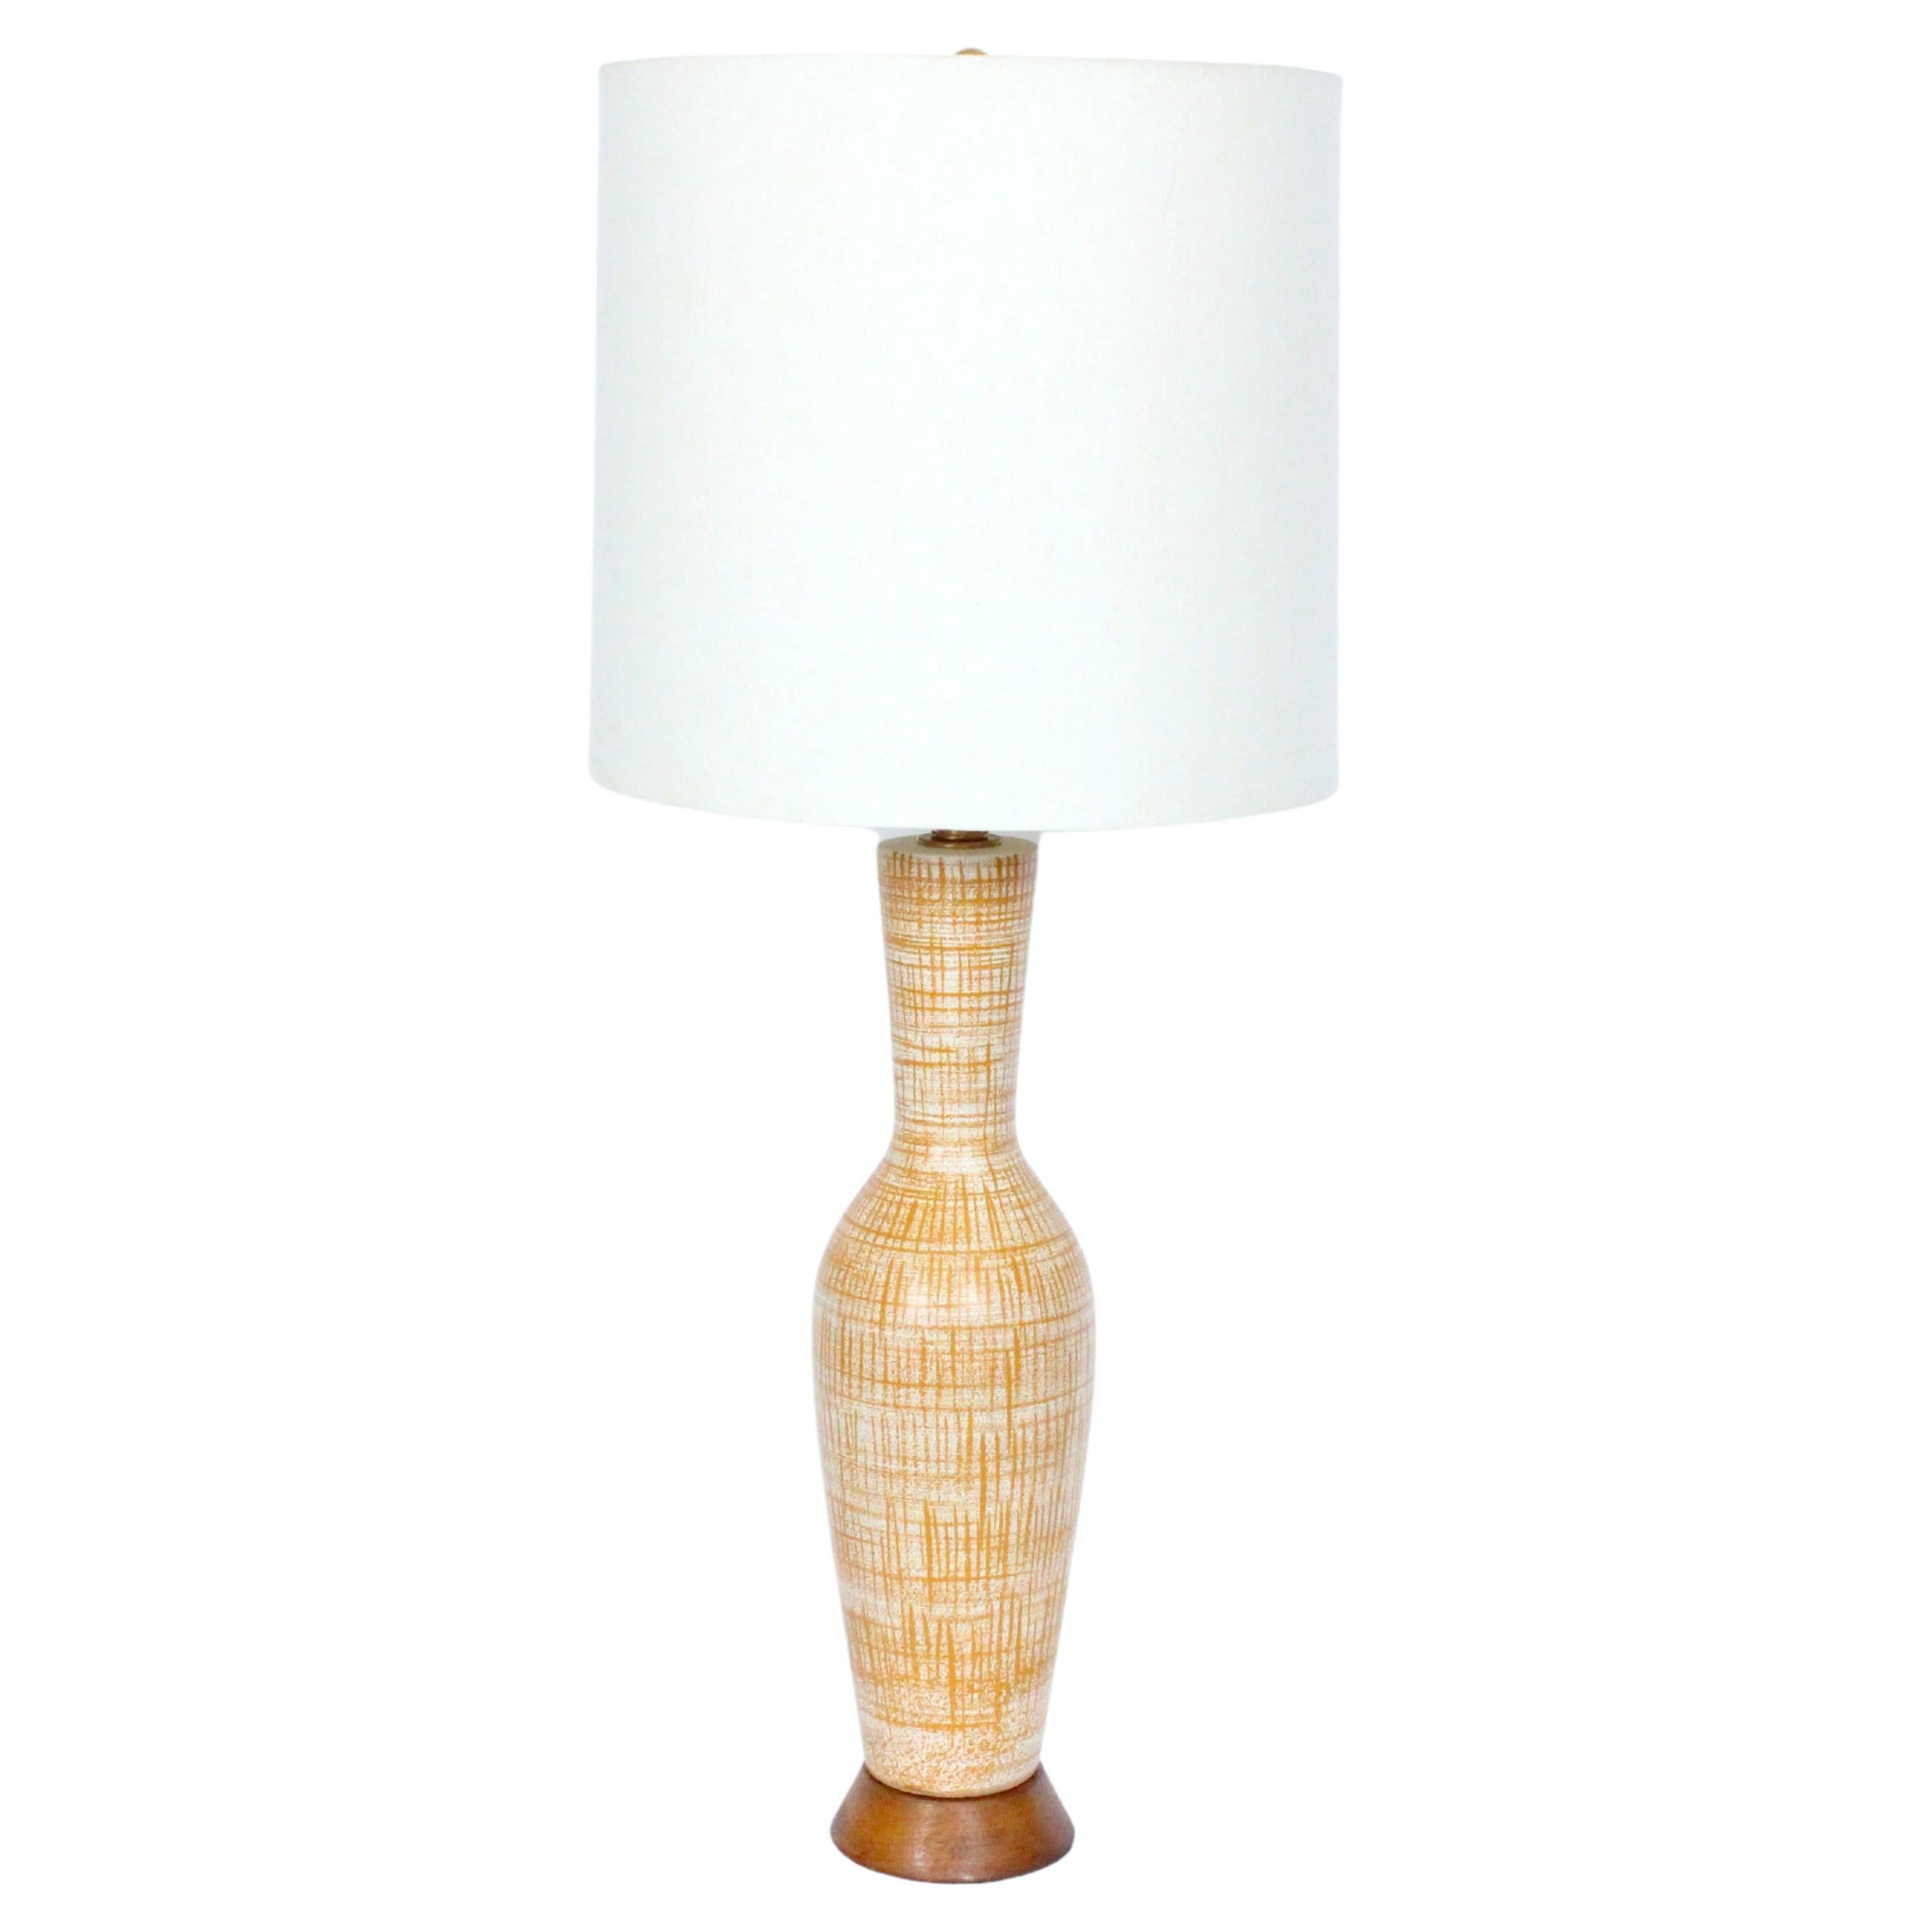 Tall Design Technics Pottery White Table Lamp with Woven Rust Pattern, 1950's